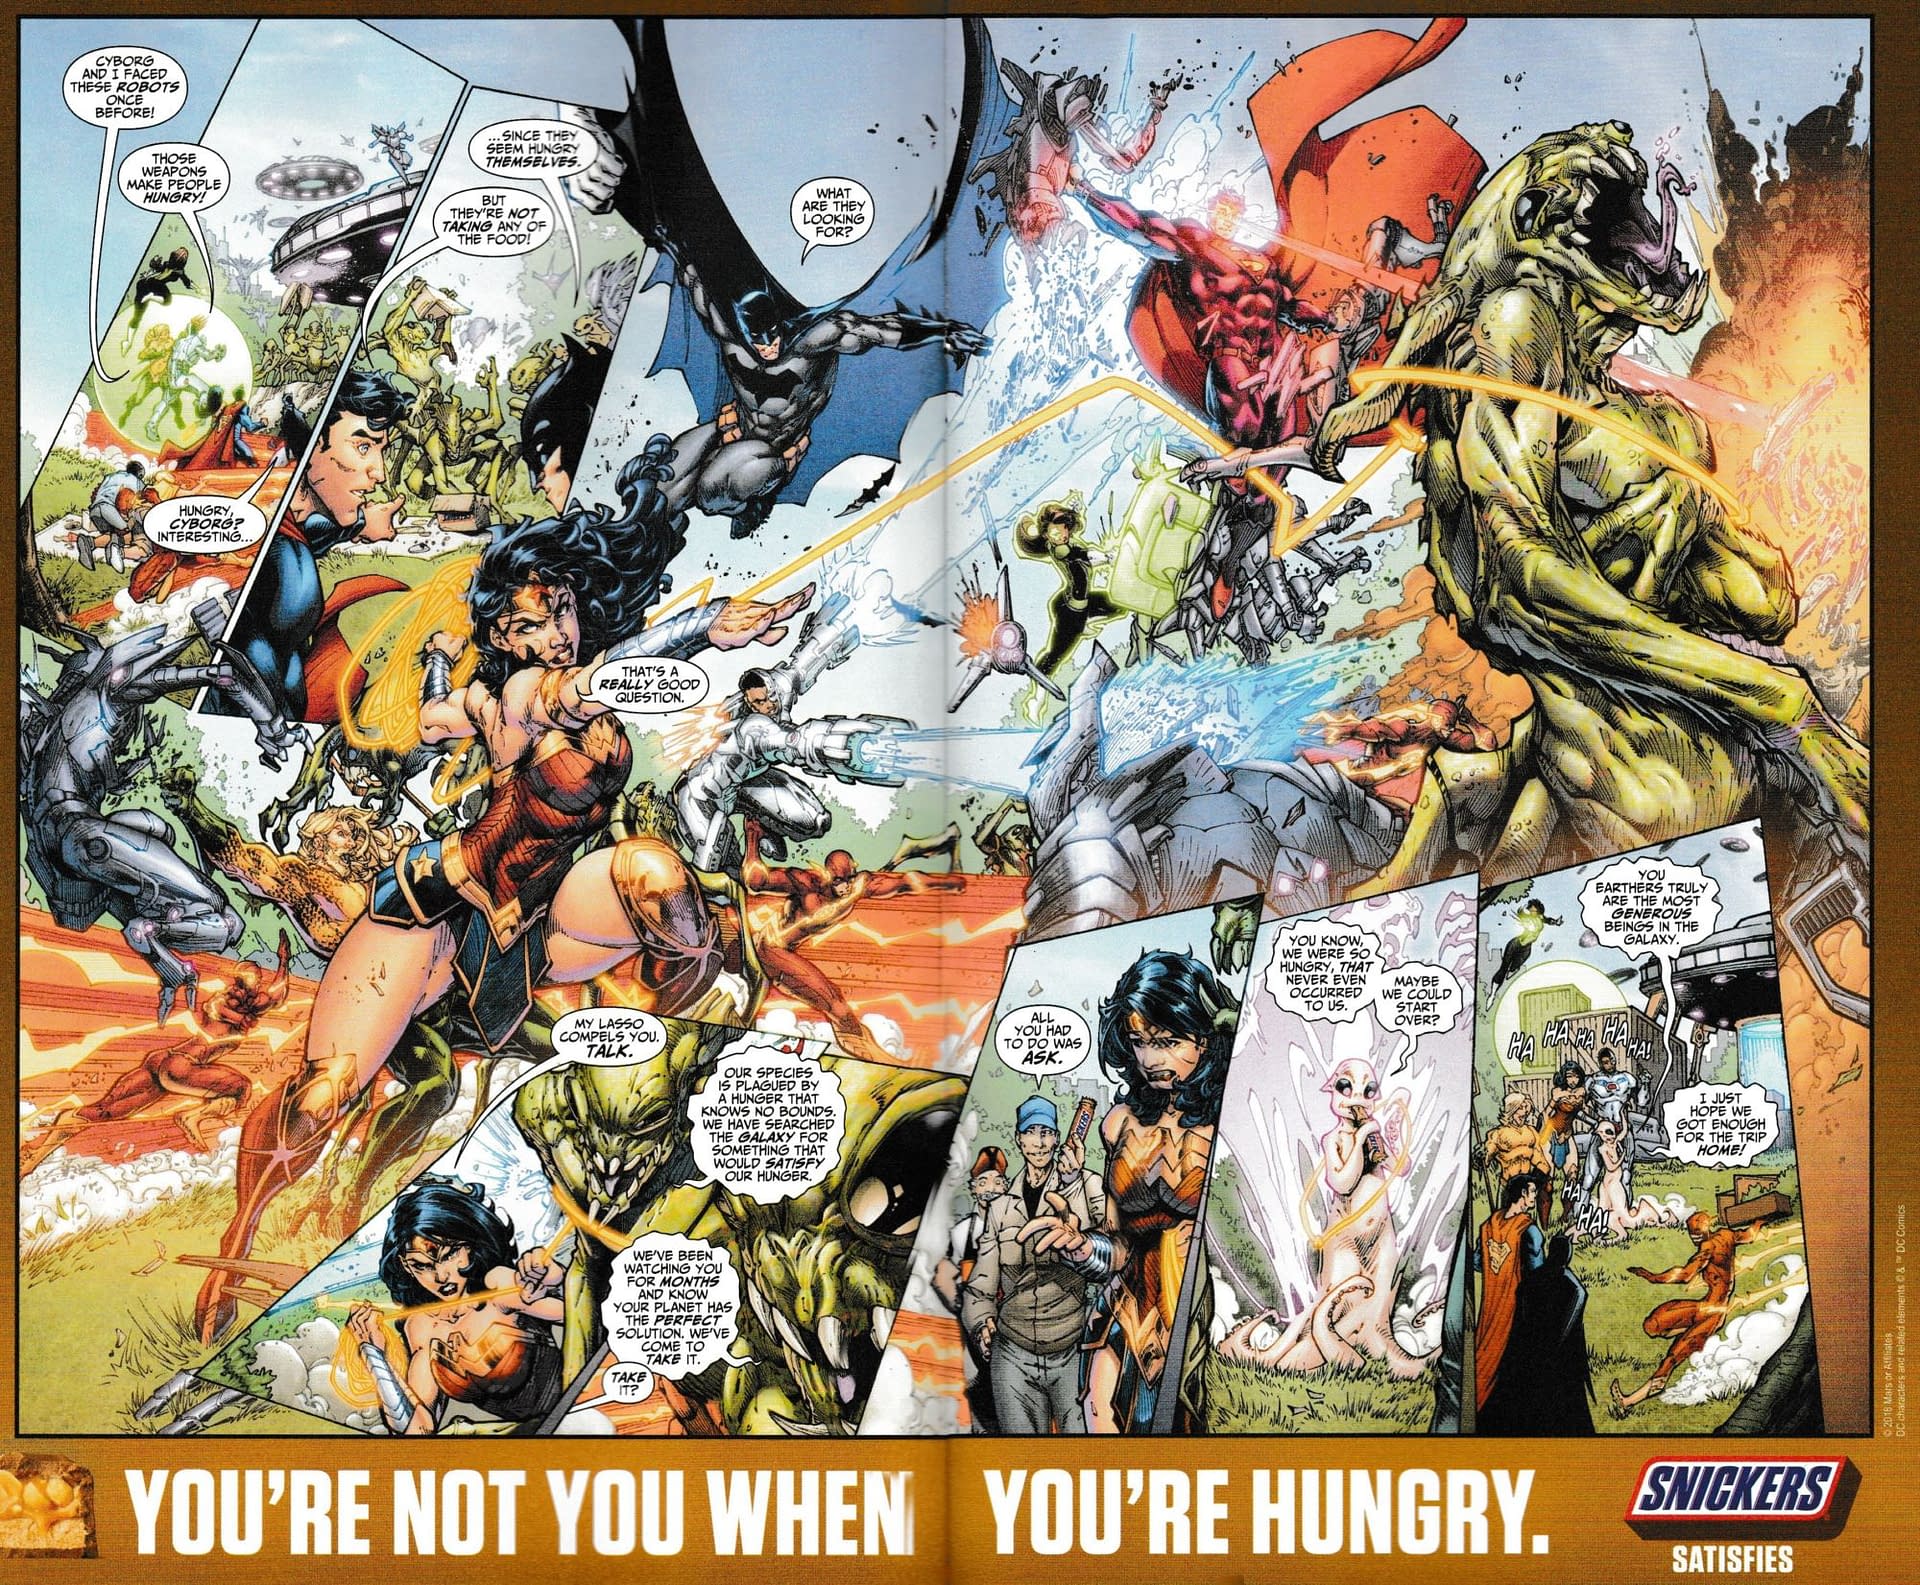 Watch Out for The Double Page Snickers Ad in Today's DC Comics